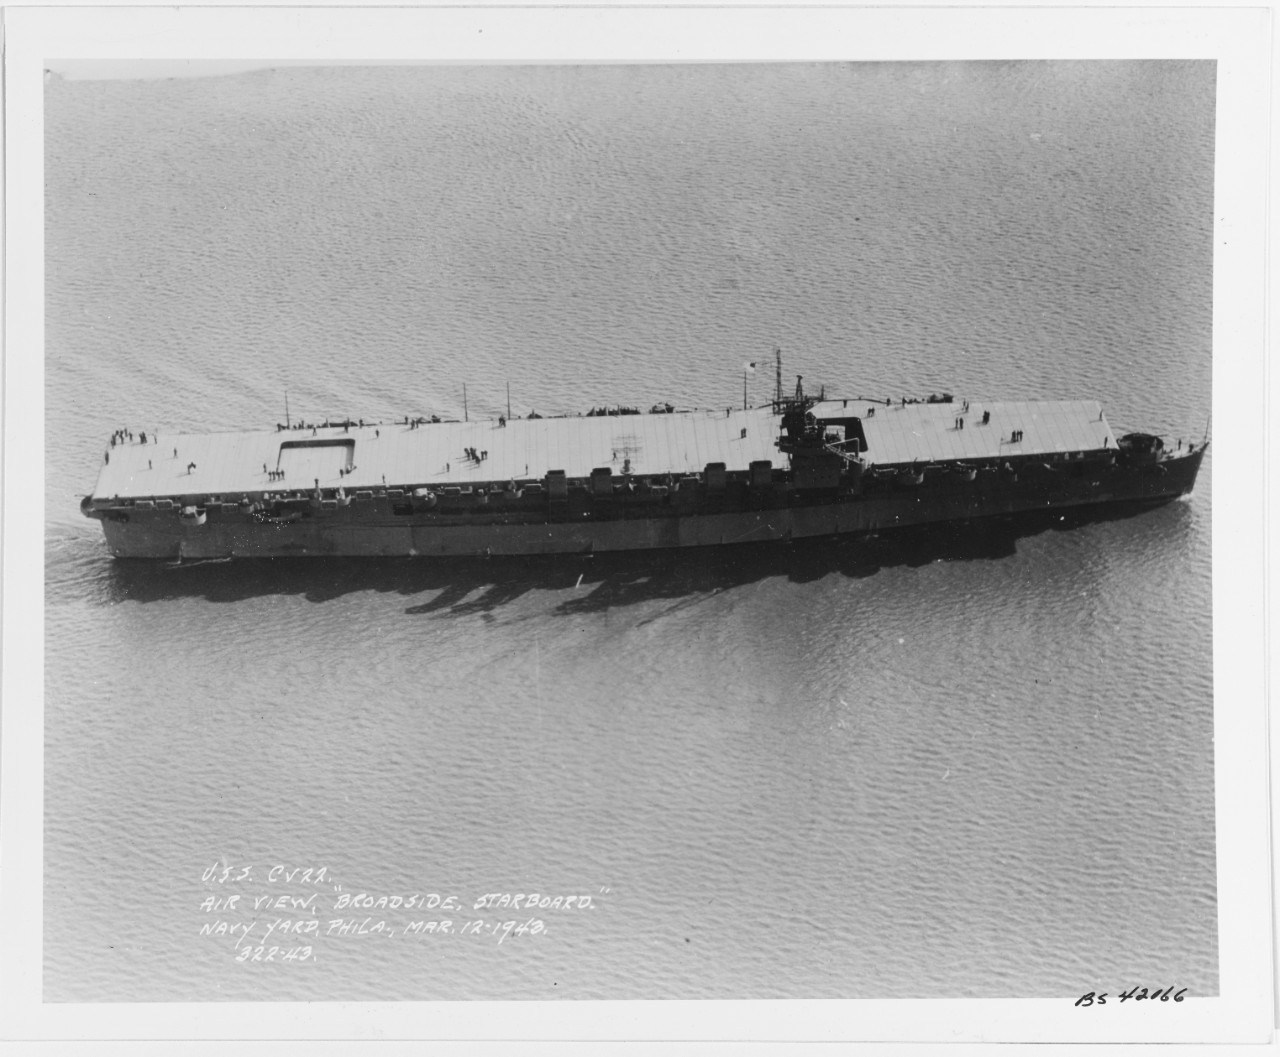 USS INDEPENDENCE (CVL-22), air view, broadside, starboard.